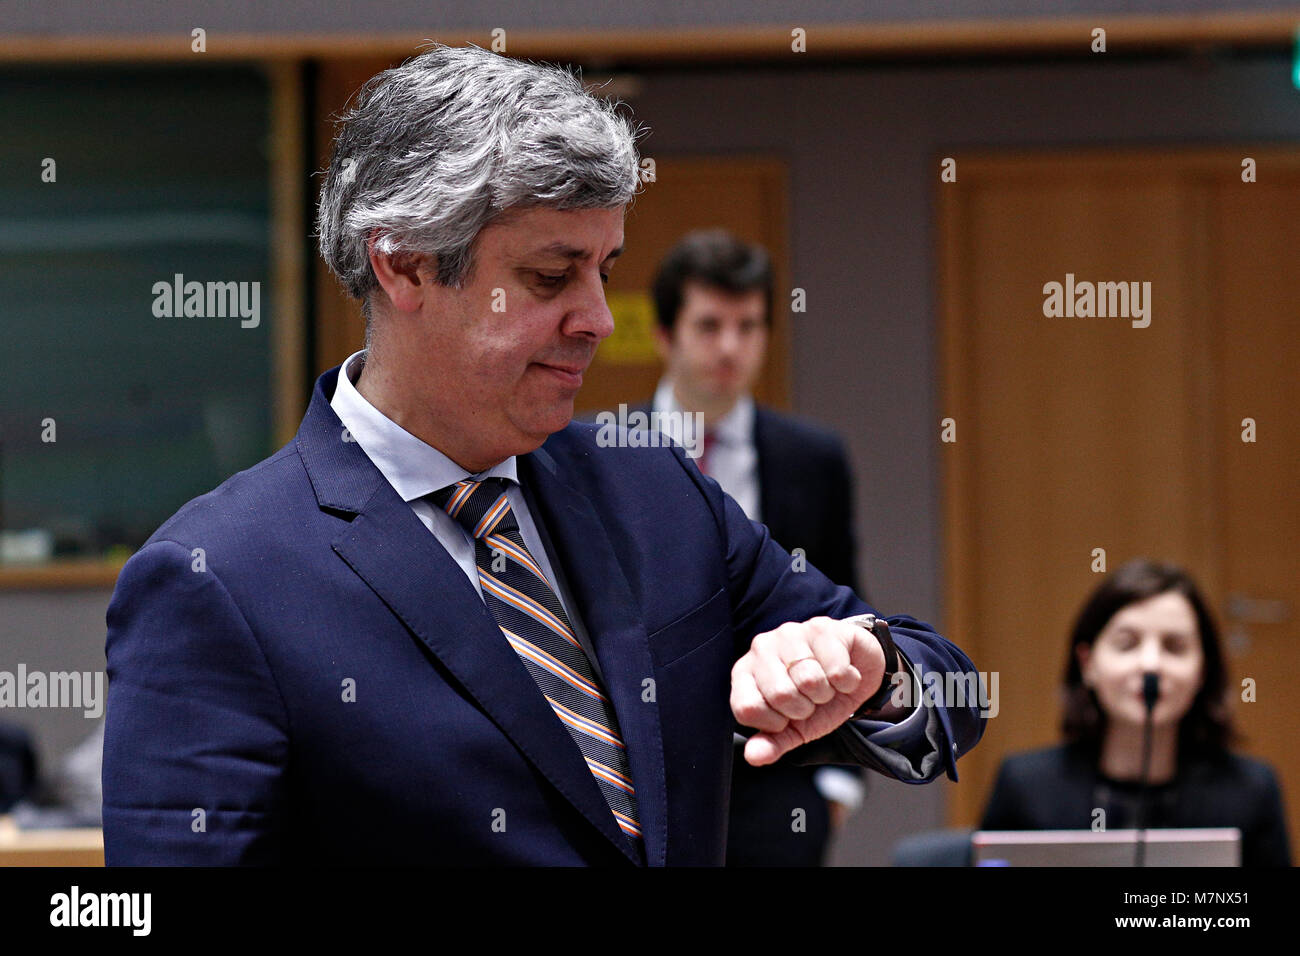 Brussels, Belgium. 12th March, 2018. Mario Centeno , President of the Eurogroup attends an Eurogroup meeting at the EU headquarters in Brussels, Belgium on March 12, 2018. Alexandros Michailidis/Alamy Live News Stock Photo